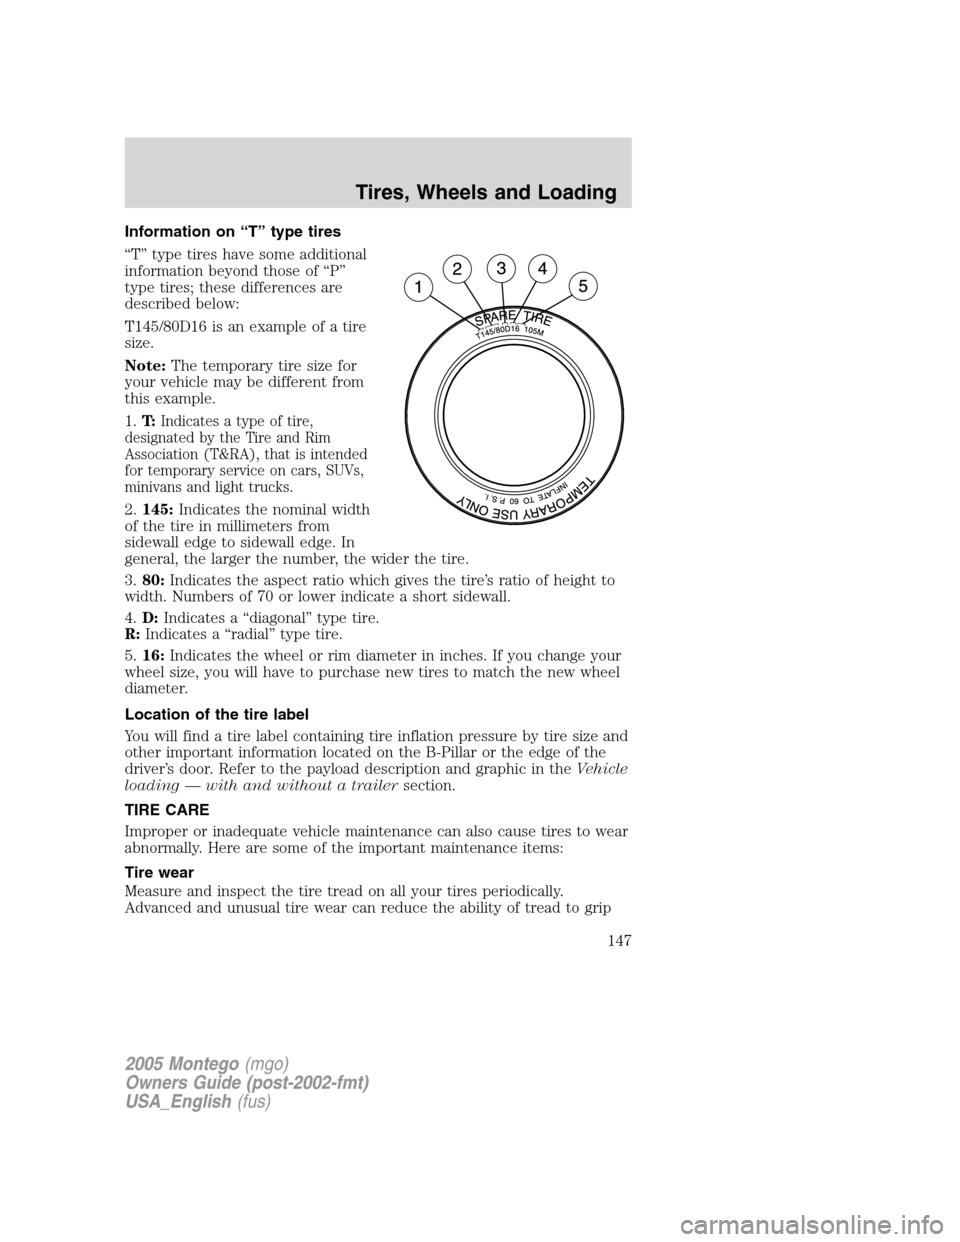 Mercury Montego 2005  s User Guide Information on “T” type tires
“T” type tires have some additional
information beyond those of “P”
type tires; these differences are
described below:
T145/80D16 is an example of a tire
size